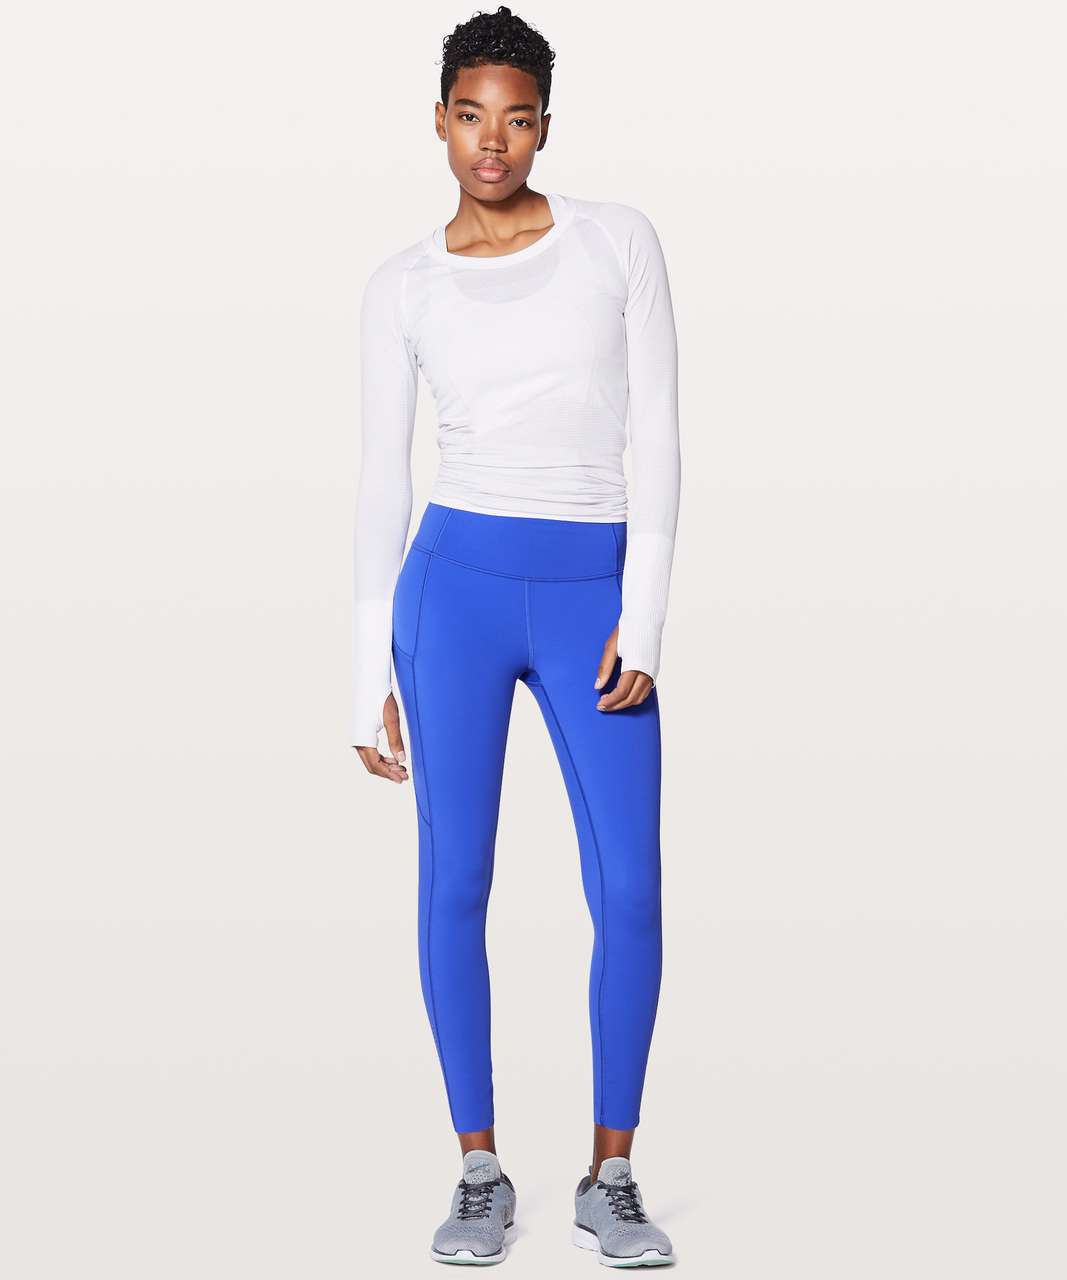 NWT! LULULEMON FAST AND FREE TIGHT 25 *NULUX City Grit White Blue Fog, Size: 2